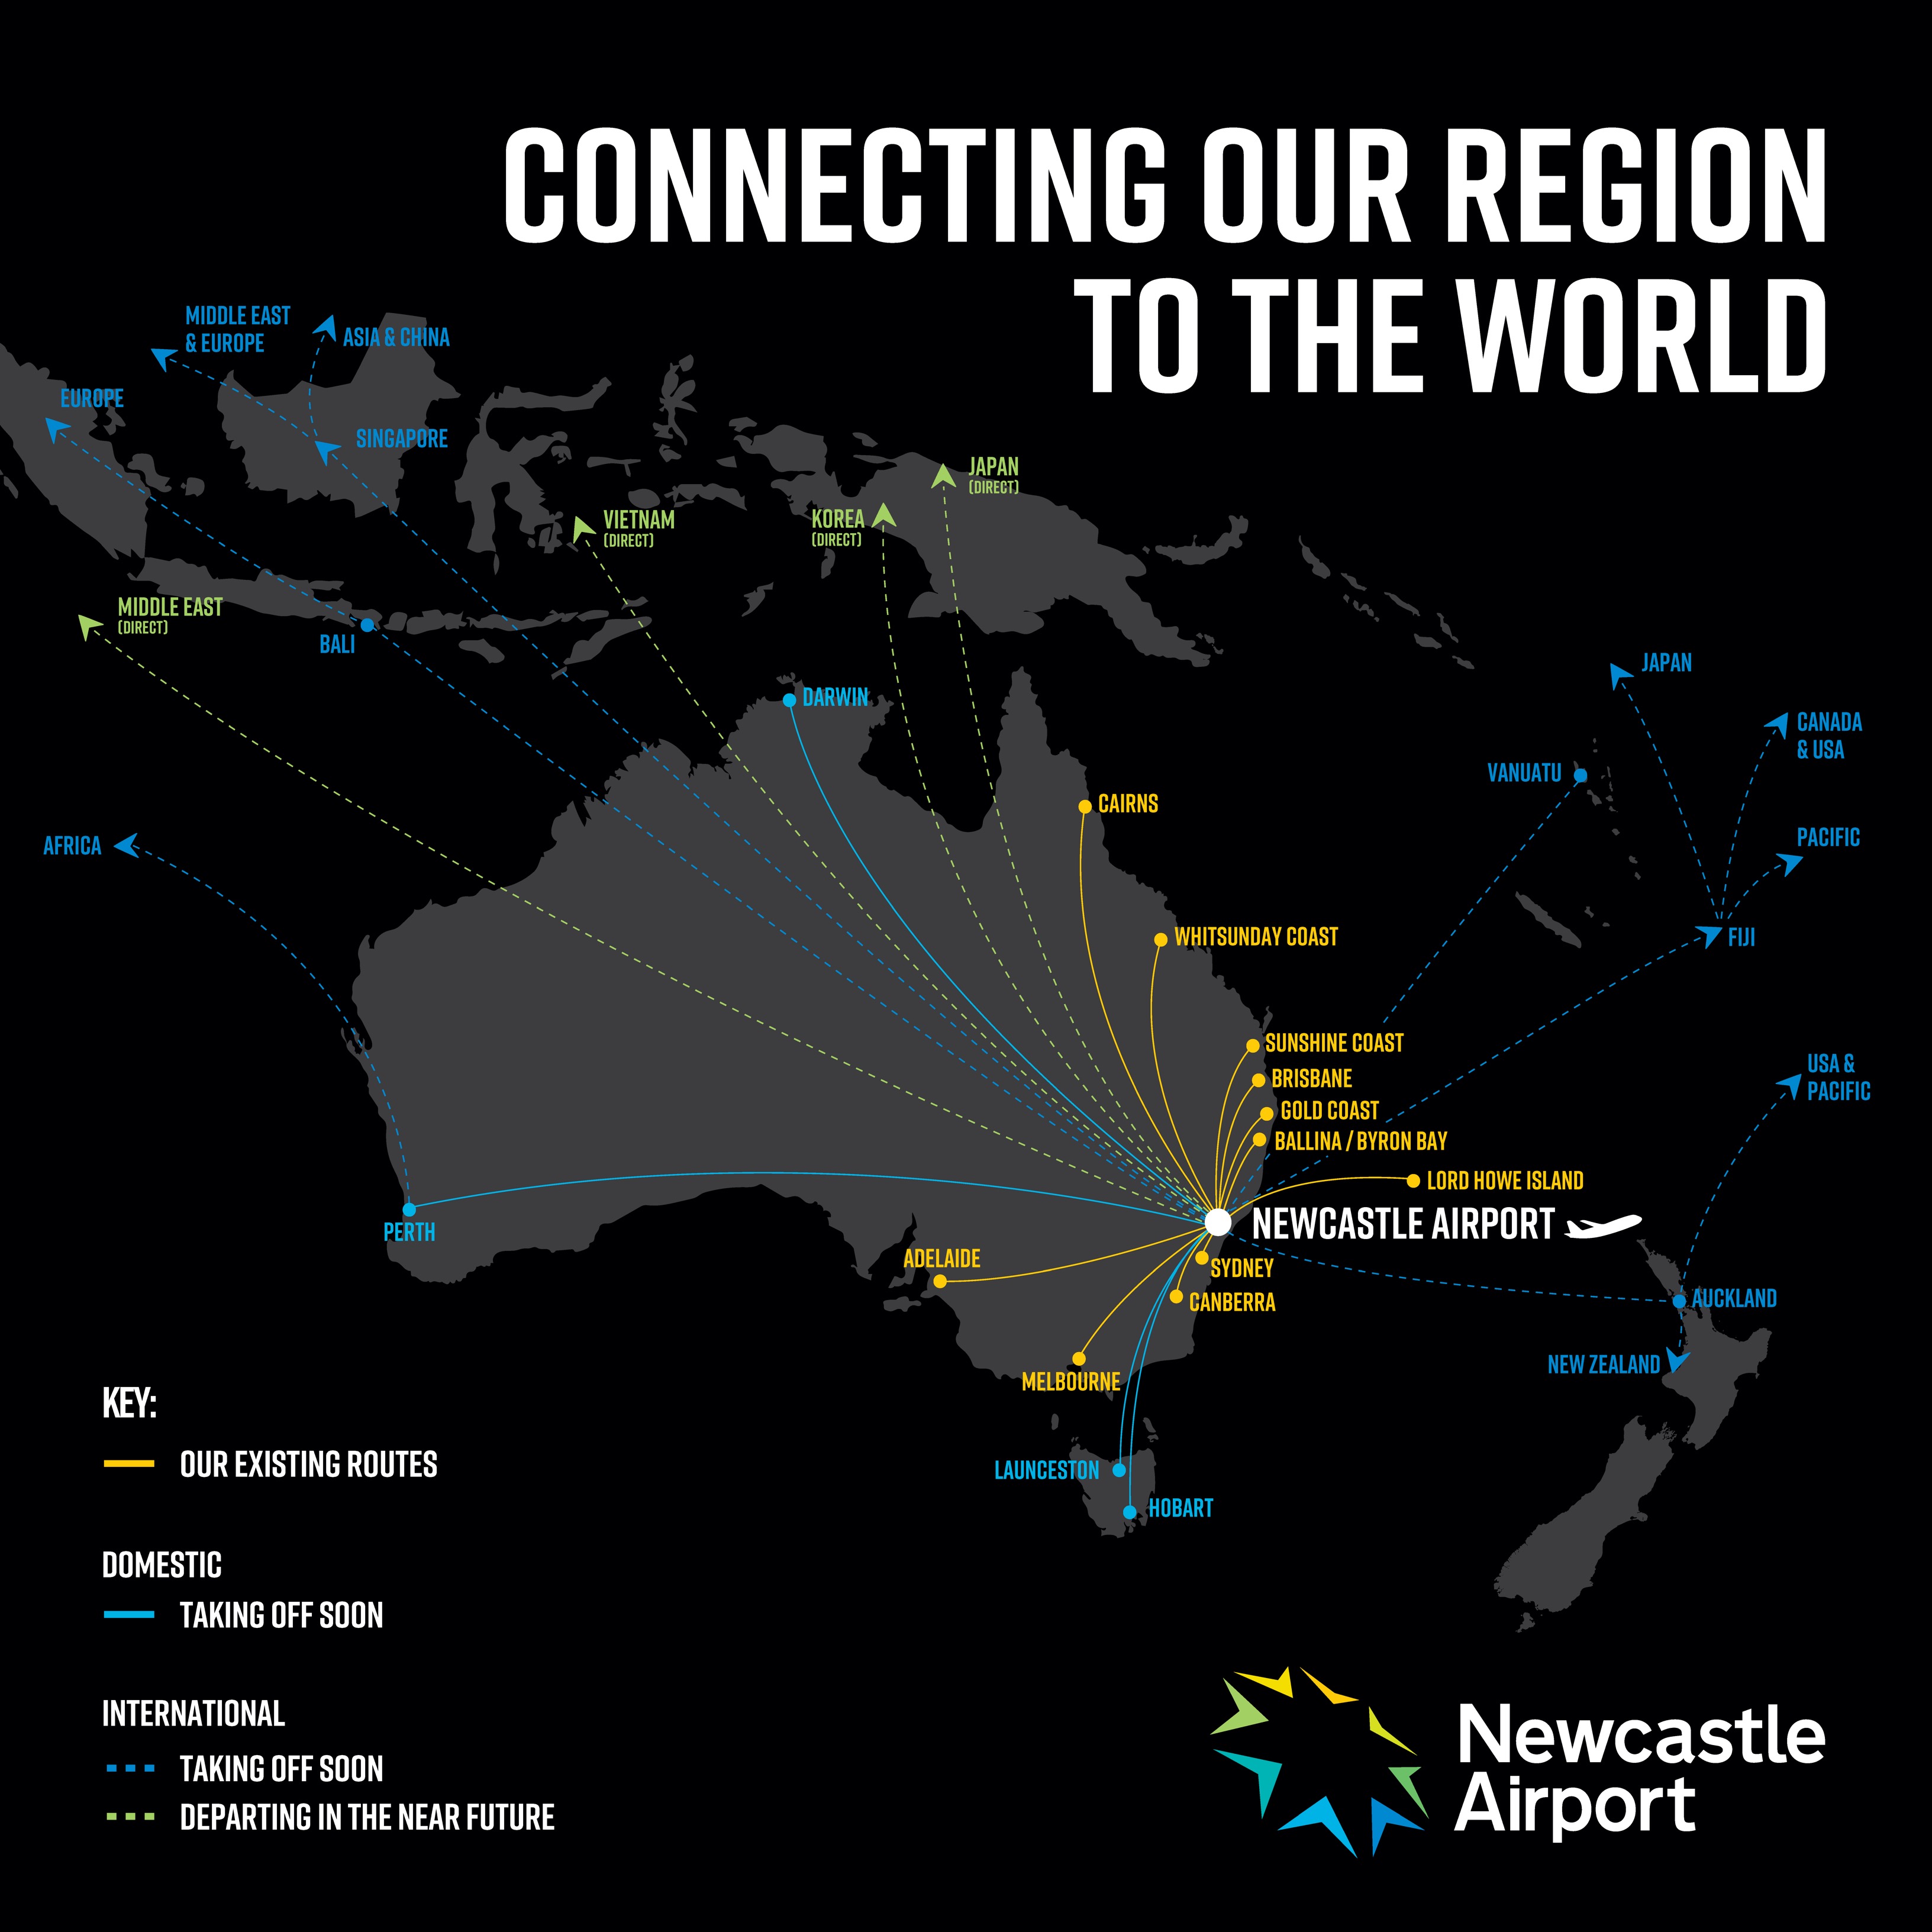 a map of Australia and surrounding countries. The image shows lines pointing to countries that flight routes are planned for.